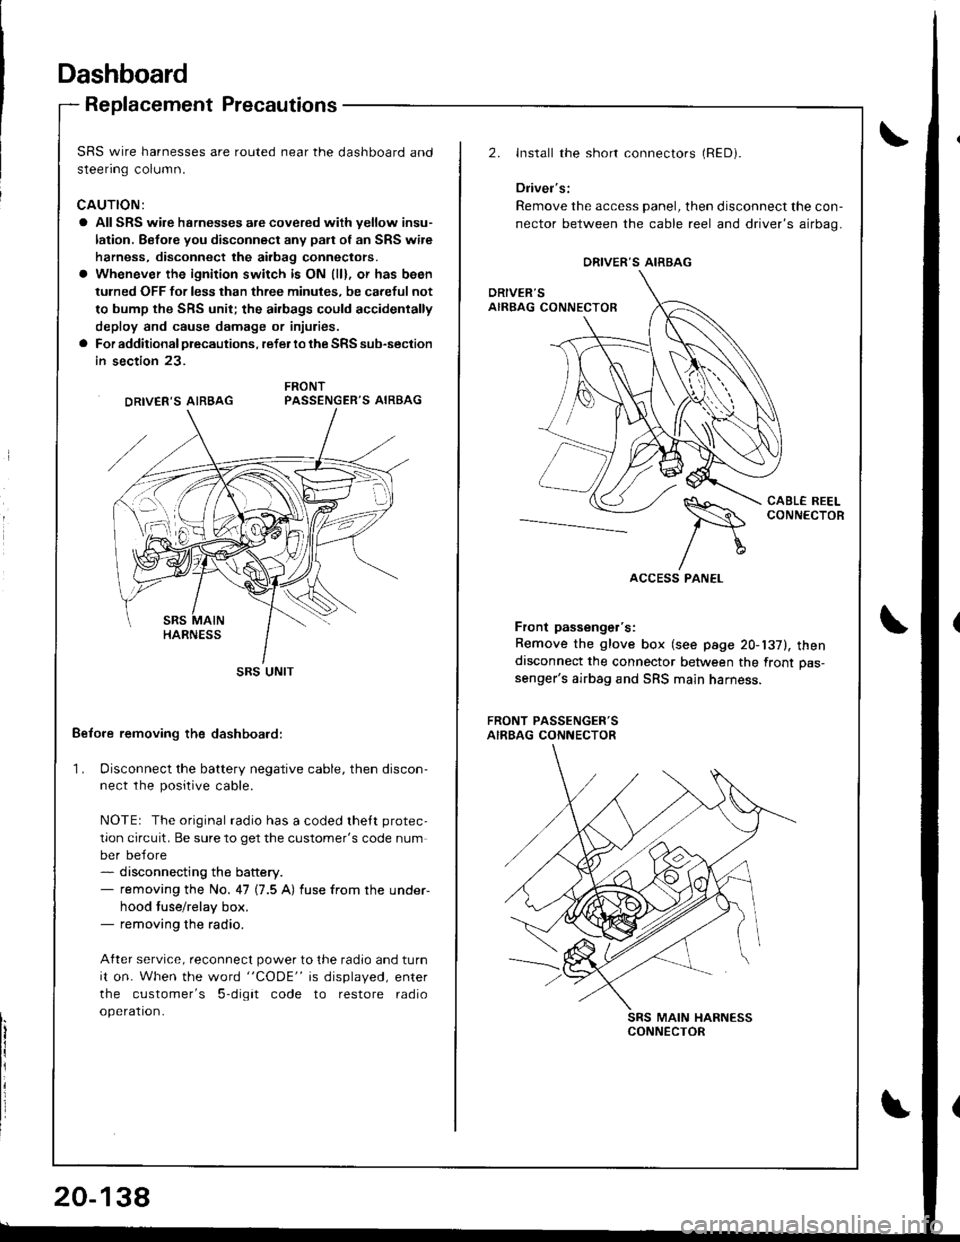 HONDA INTEGRA 1998 4.G Owners Guide Dashboard
Replacement Precautions
SRS wire harnesses are routed near the dashboard and
steenng column.
CAUTION:
a All SRS wire hsrnesses are covered wiih yellow insu-
lation. Before you disconnect any